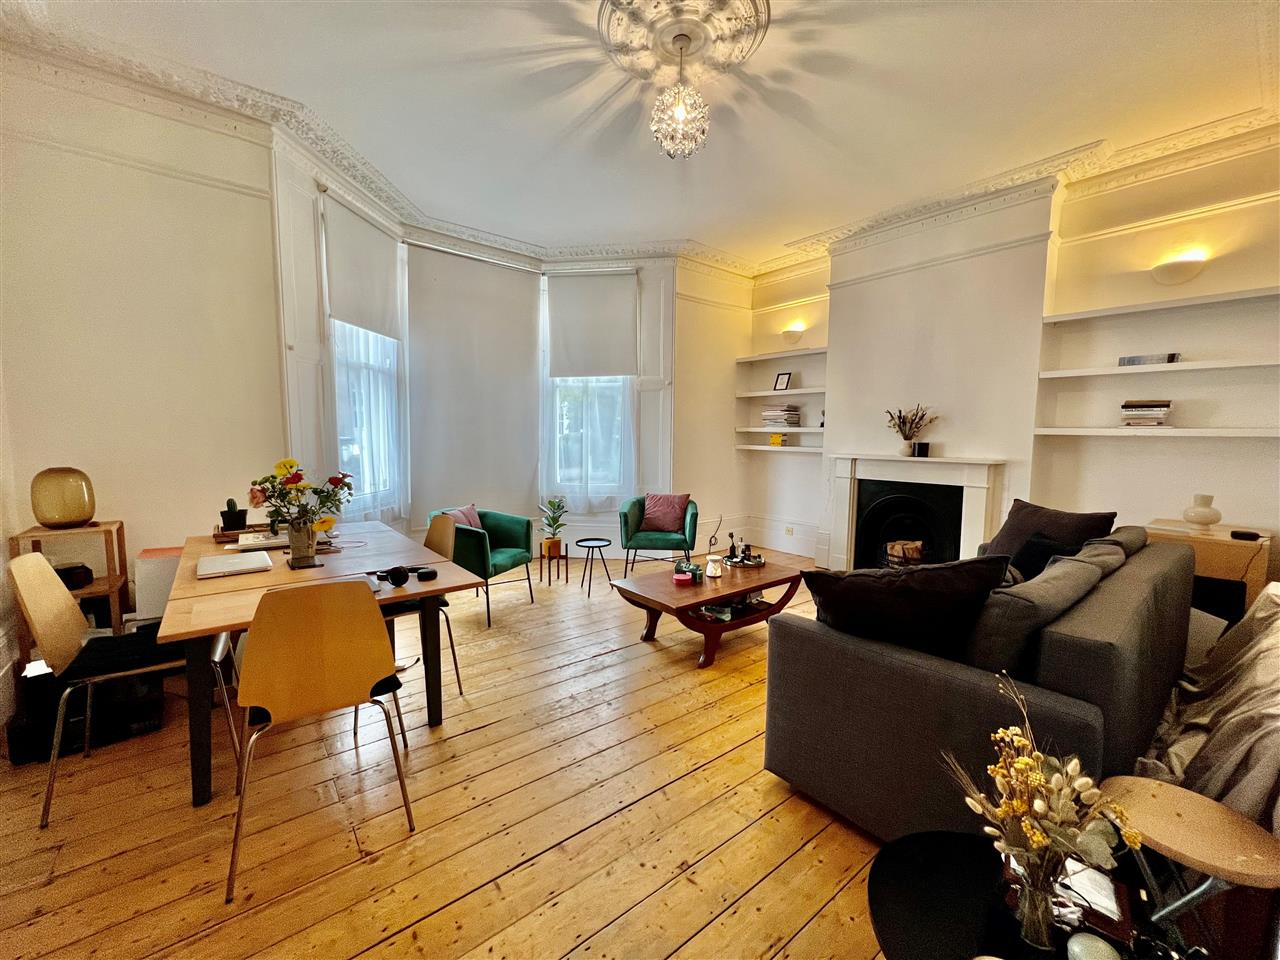 AVAILABLE FROM 4TH DECEMBER 2021. A spacious one bedroom apartment located on the raised ground floor of an imposing Victorian property that is situated within close proximity to local shops, bars, cafes and restaurants together with Tufnell Park Northern Line underground station. The ...